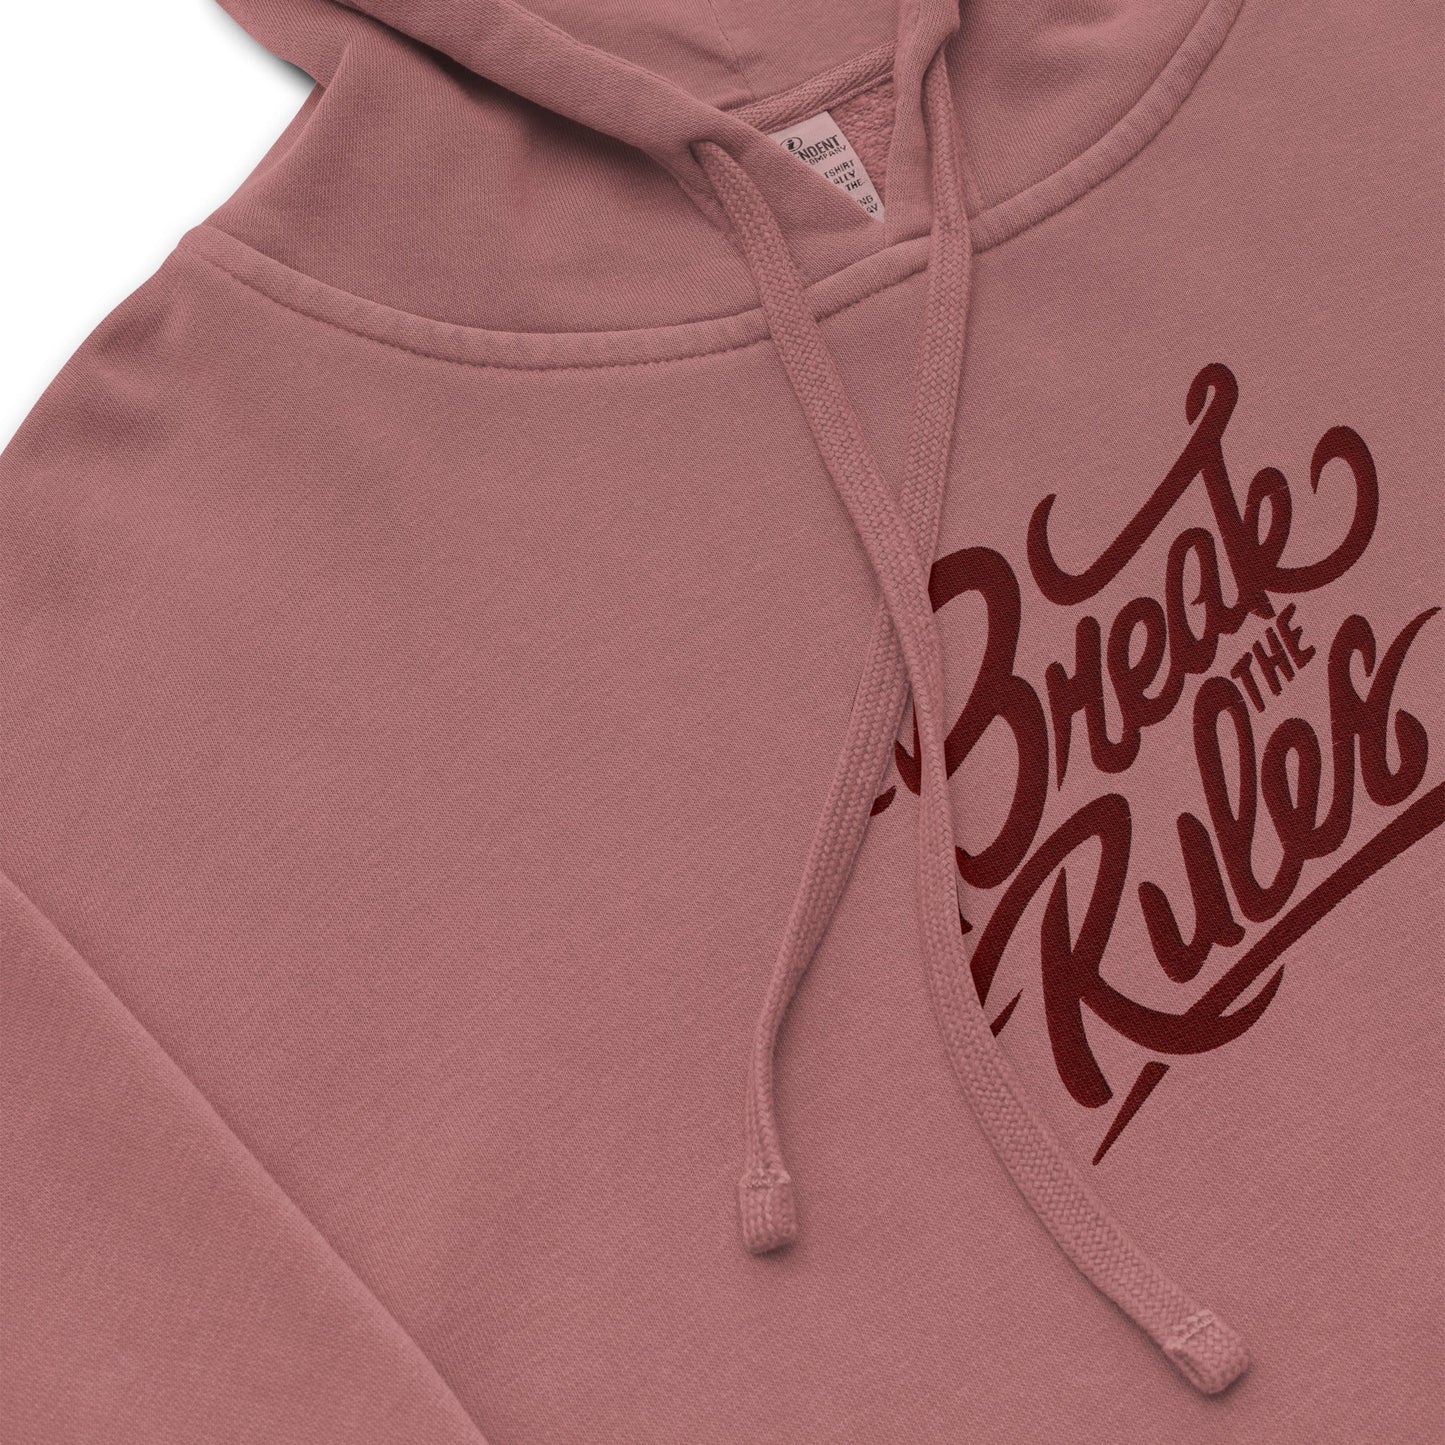 Cultureopolis Pigment-Dyed Premium Hoodie – Break the Rules Embroidered - Cultureopolis